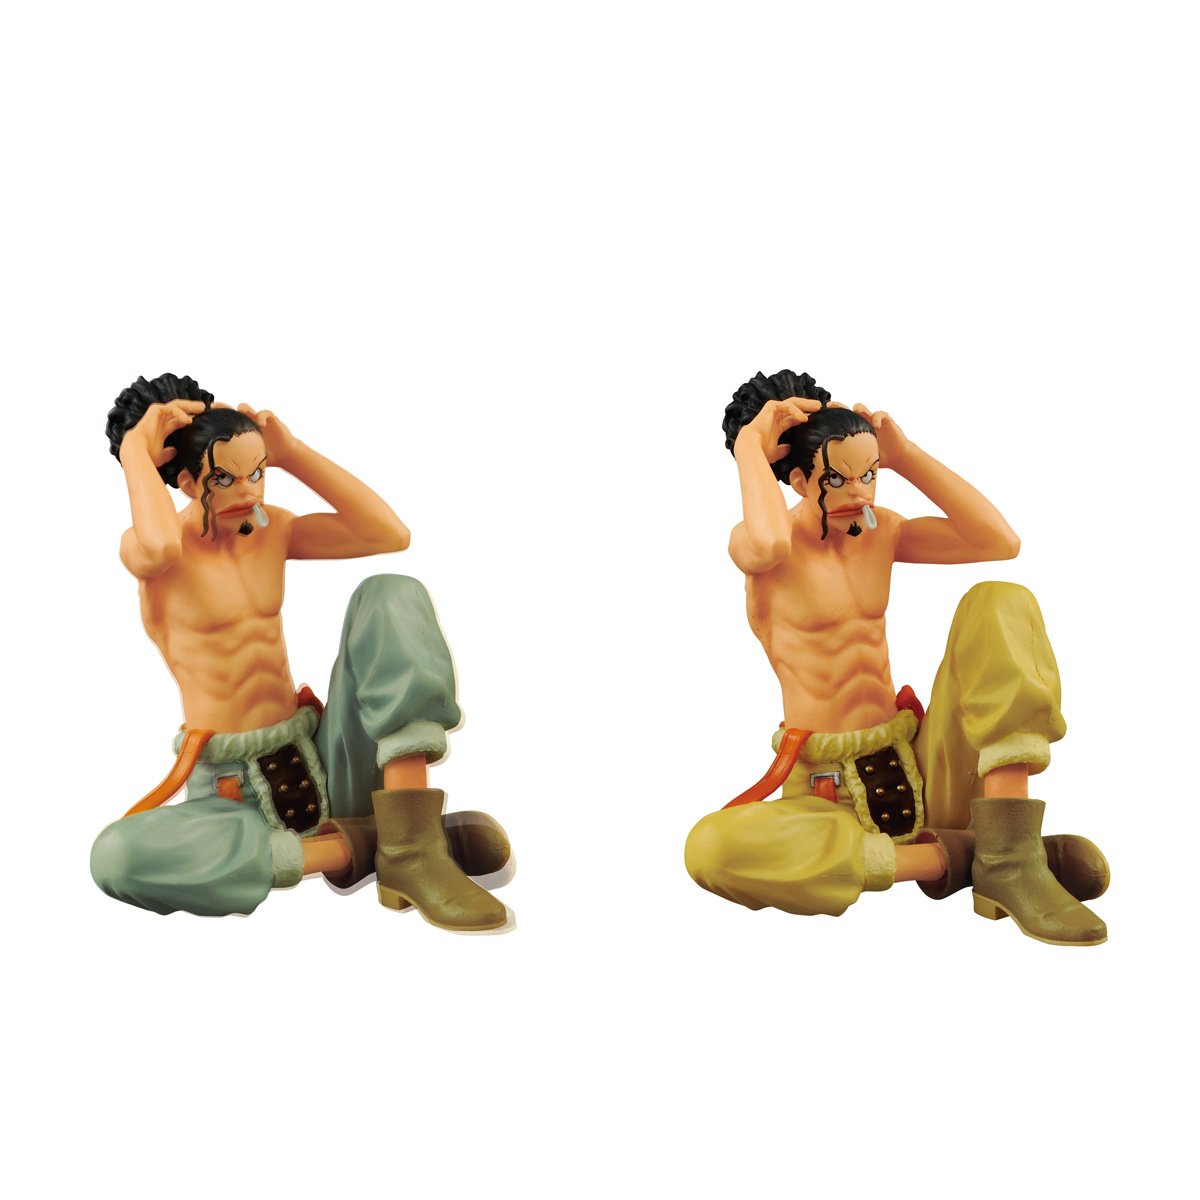 One piece naked figure